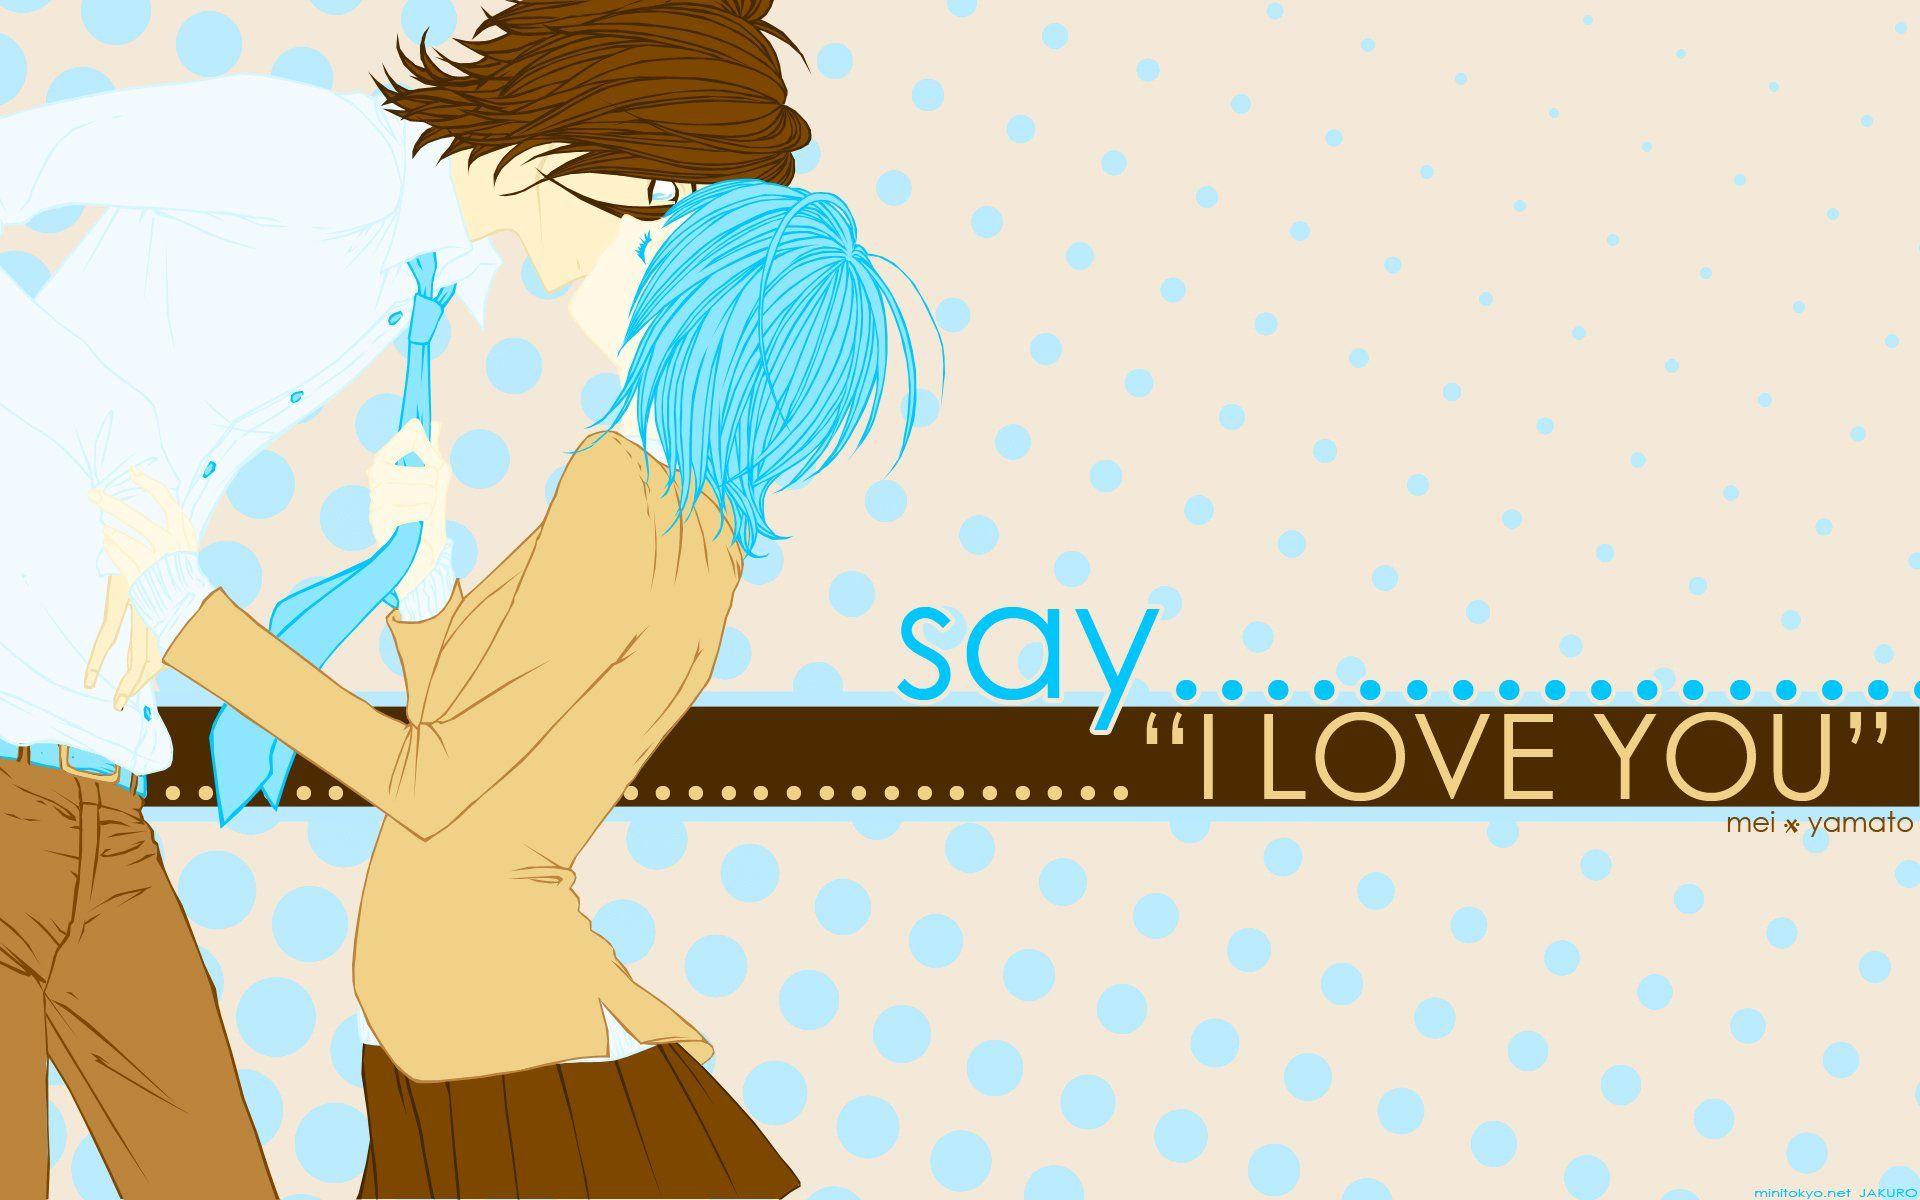 Say "I Love You" Wallpapers